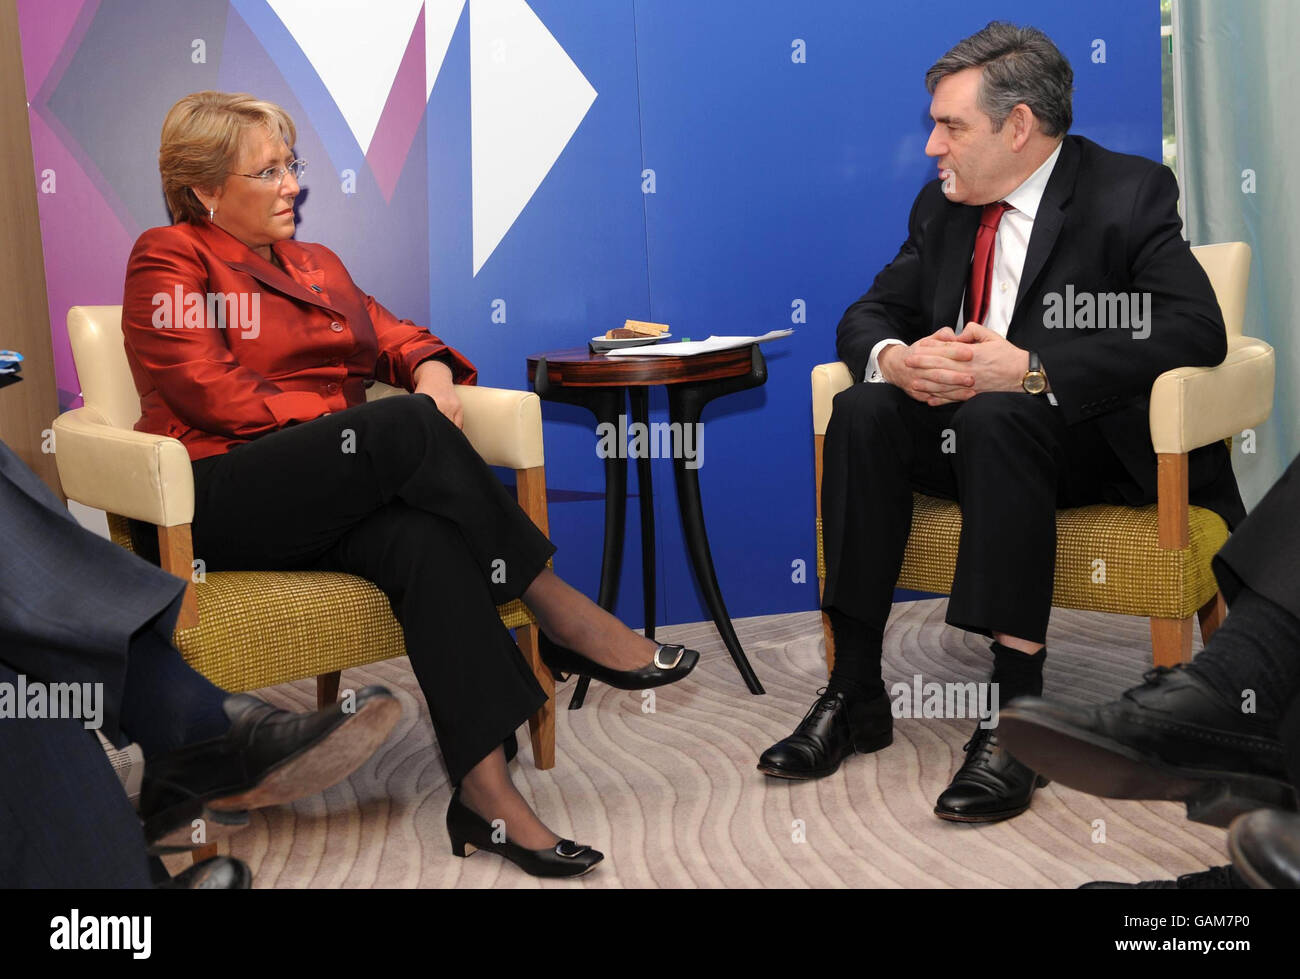 Prime Minister Gordon Brown has a meeting with Chilean President Michelle Bachelet before the first working session of the Progressive Governance Summit in Hertfordshire today. Stock Photo